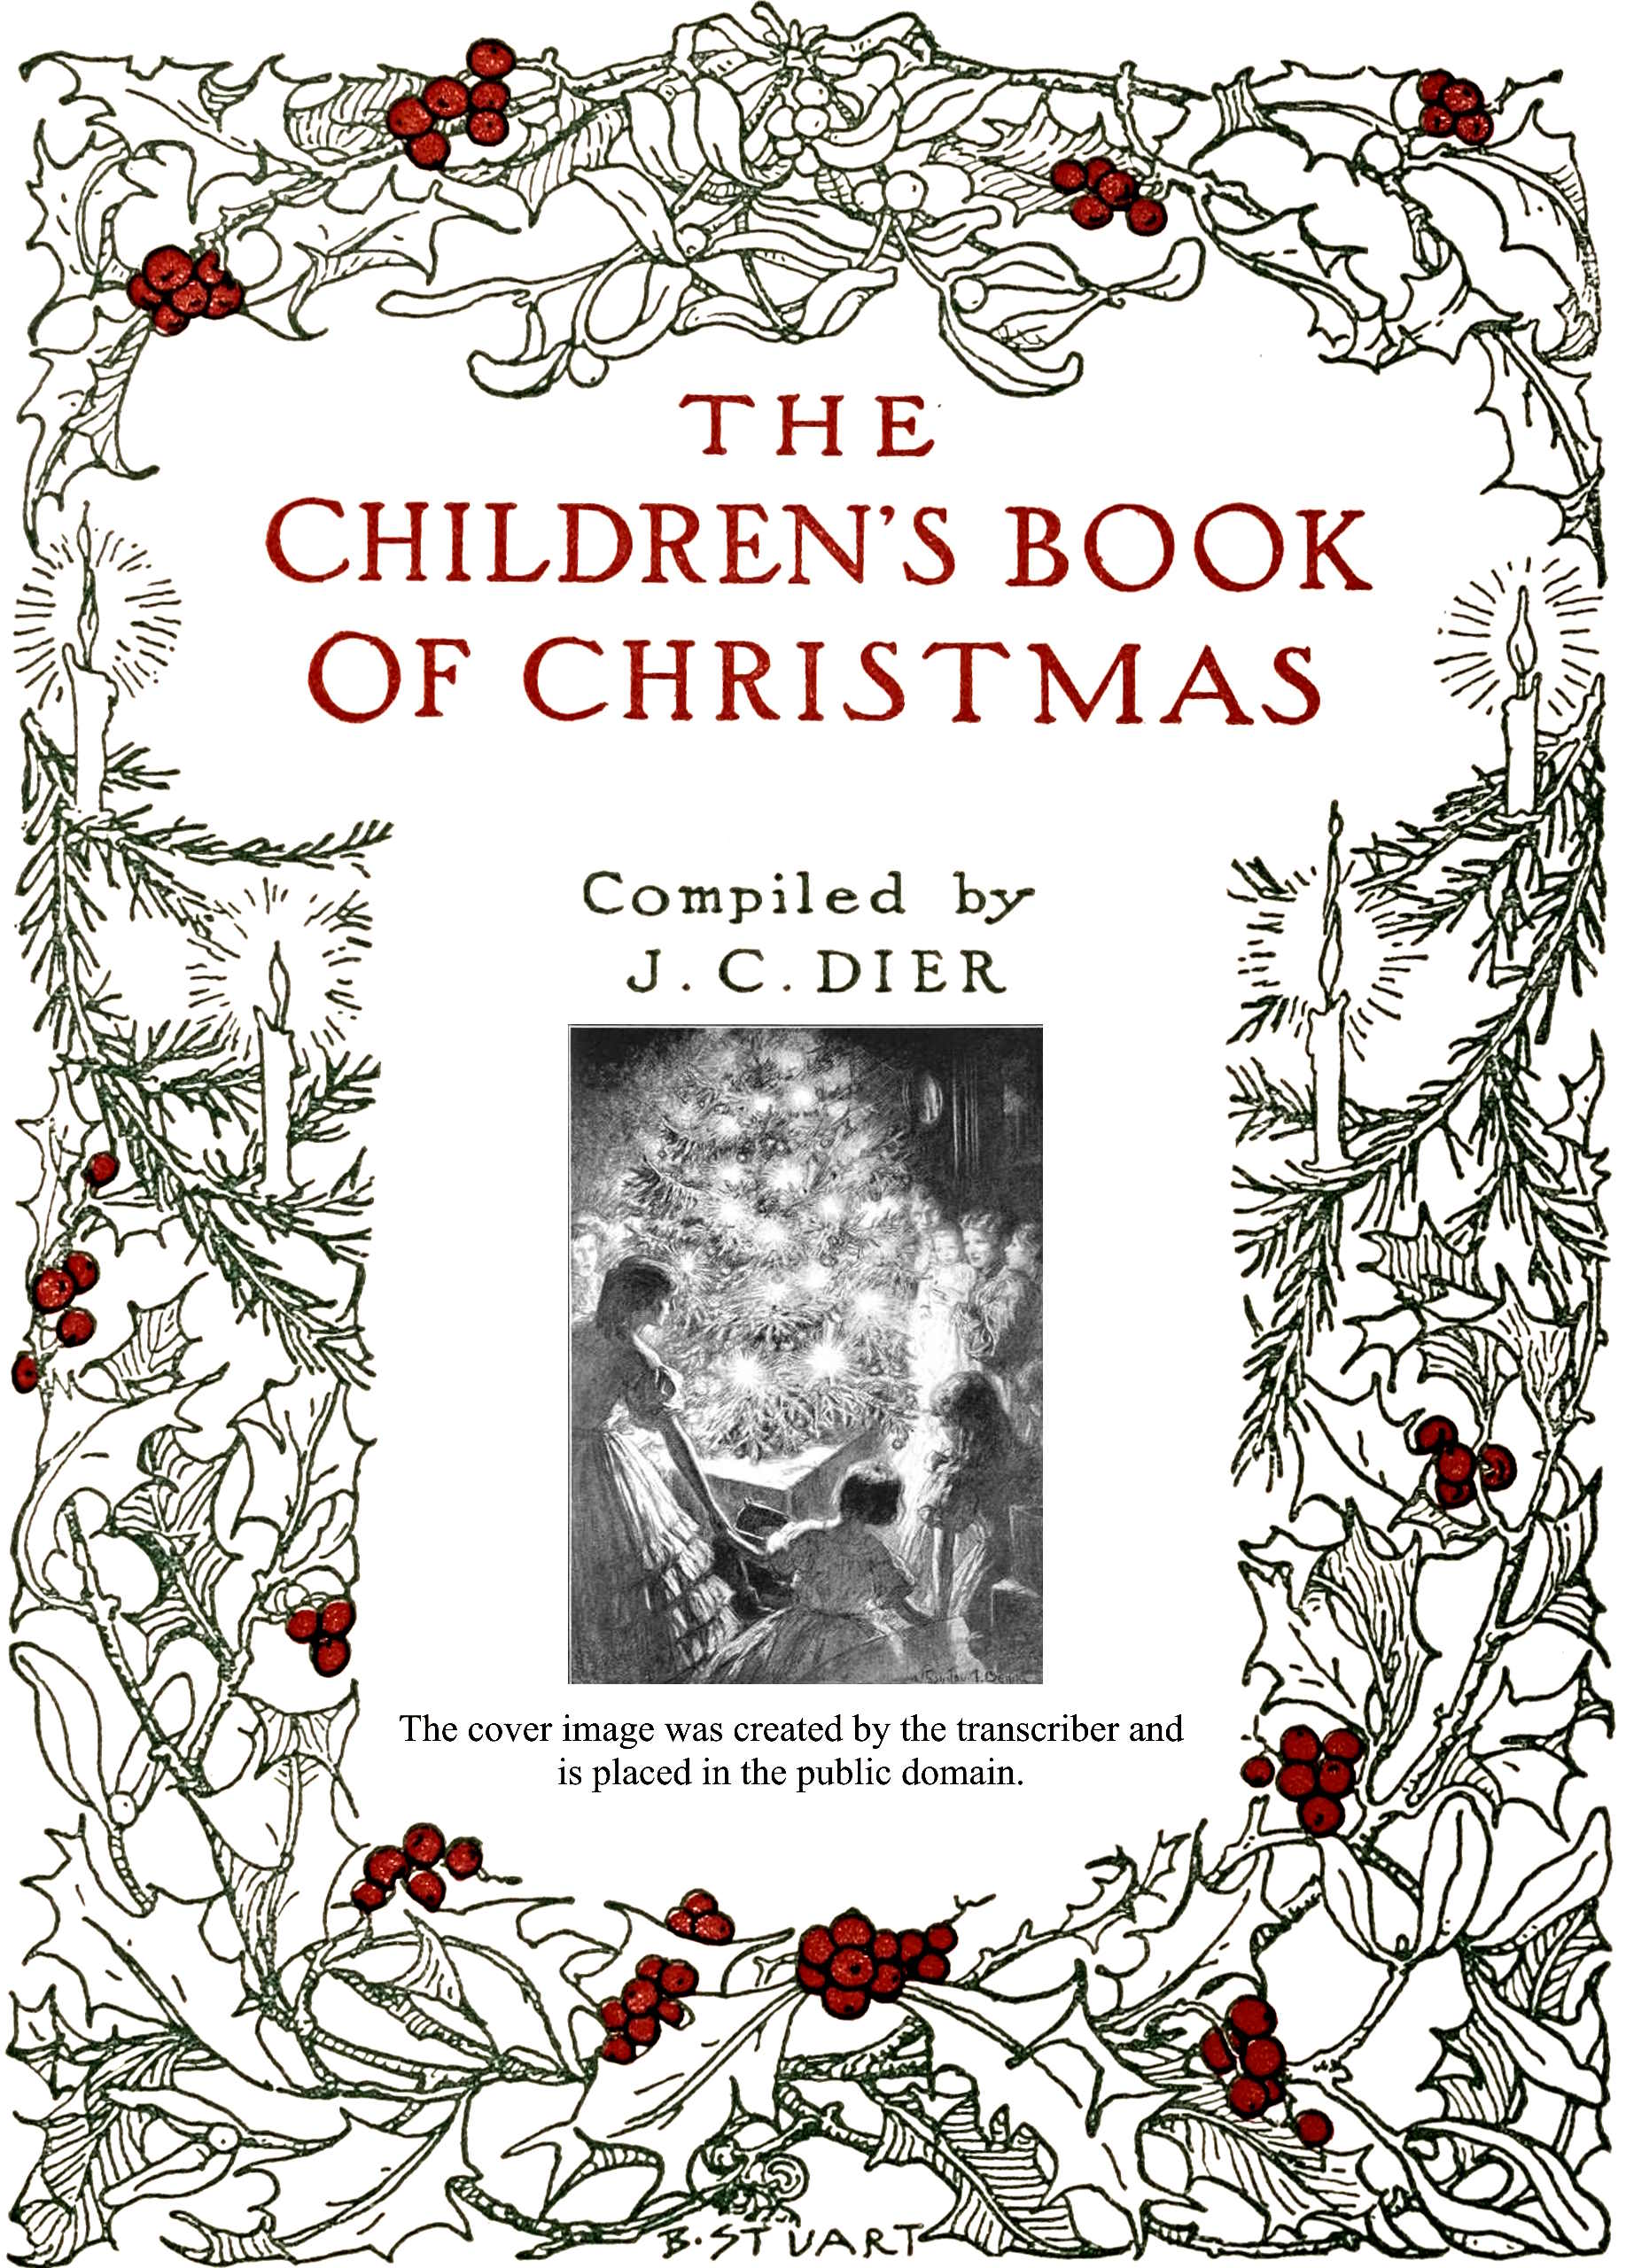 The Children's Book of Christmas